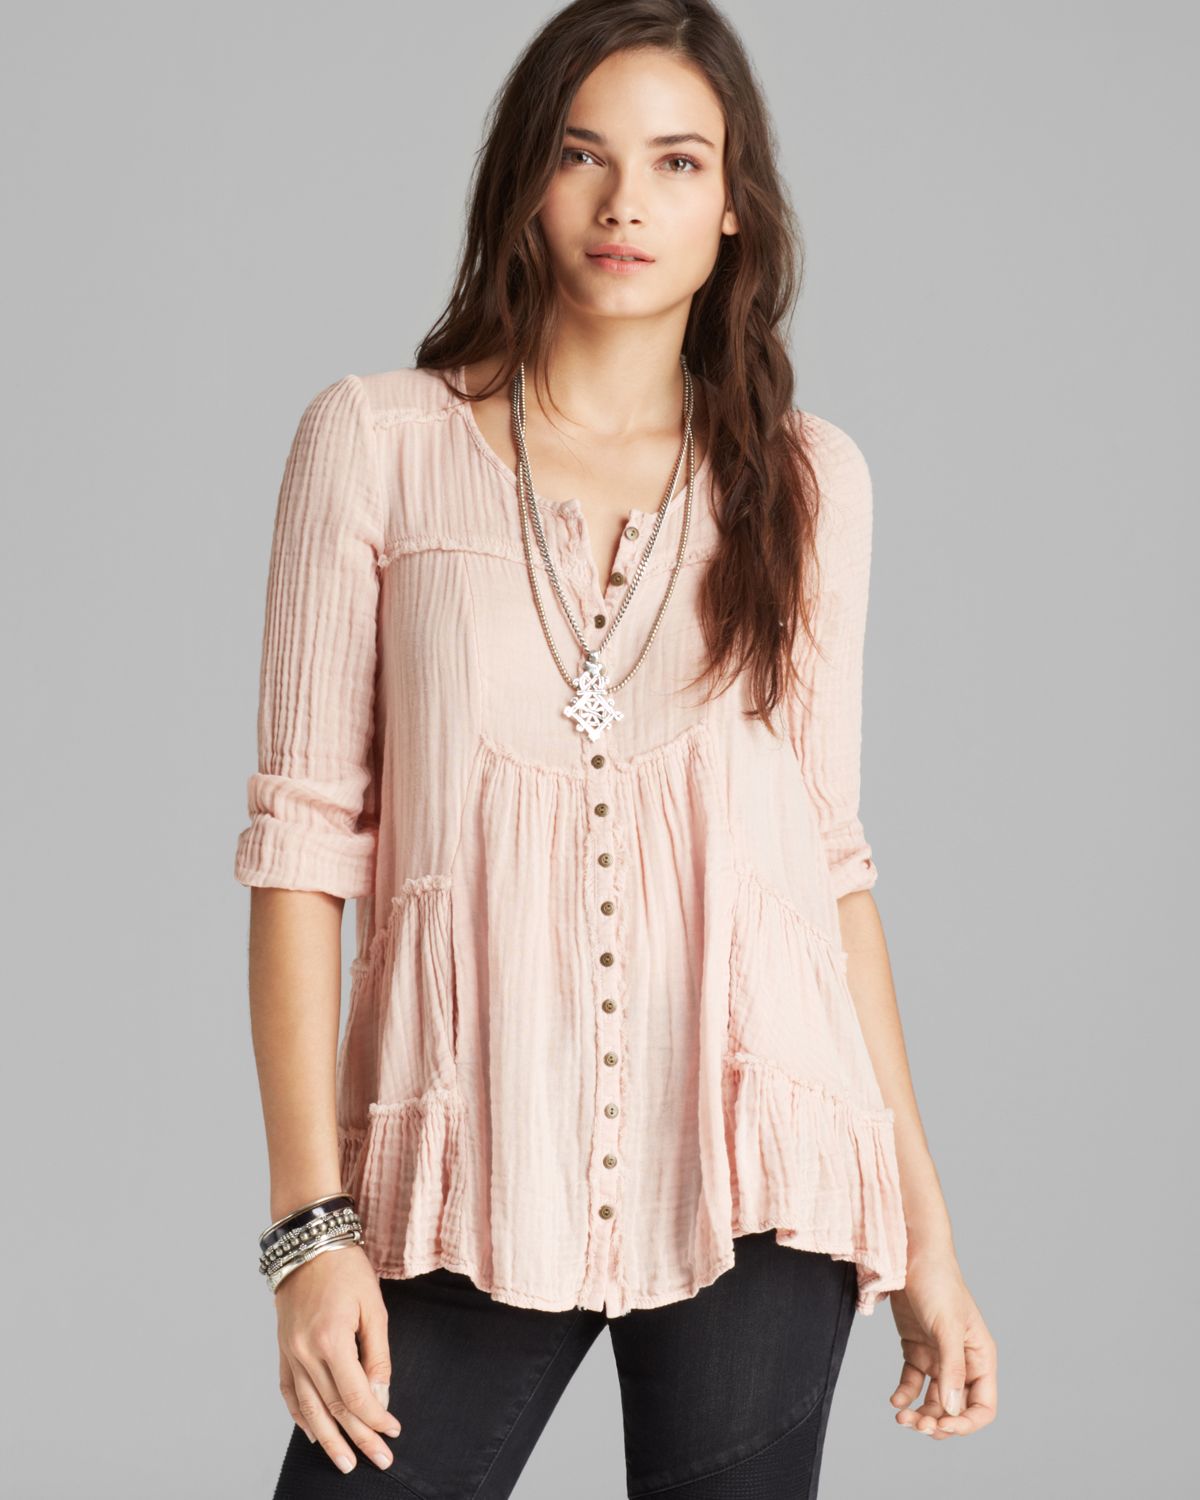 Lyst - Free People Tunic Yummy Dobby Whistle While You Work in Pink